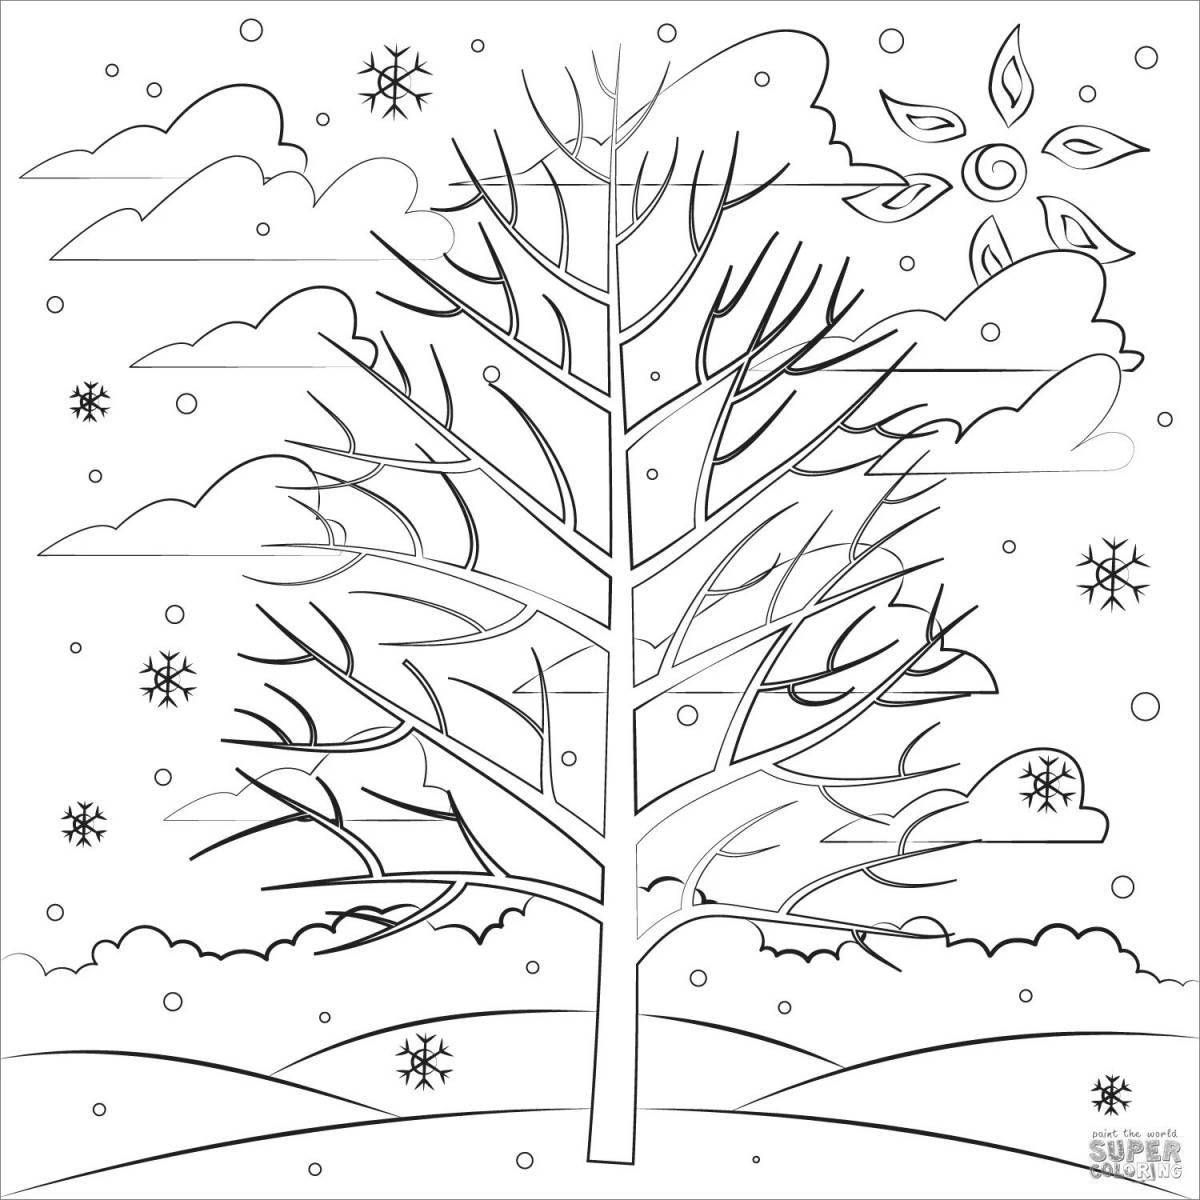 Colorful winter tree coloring page for kids